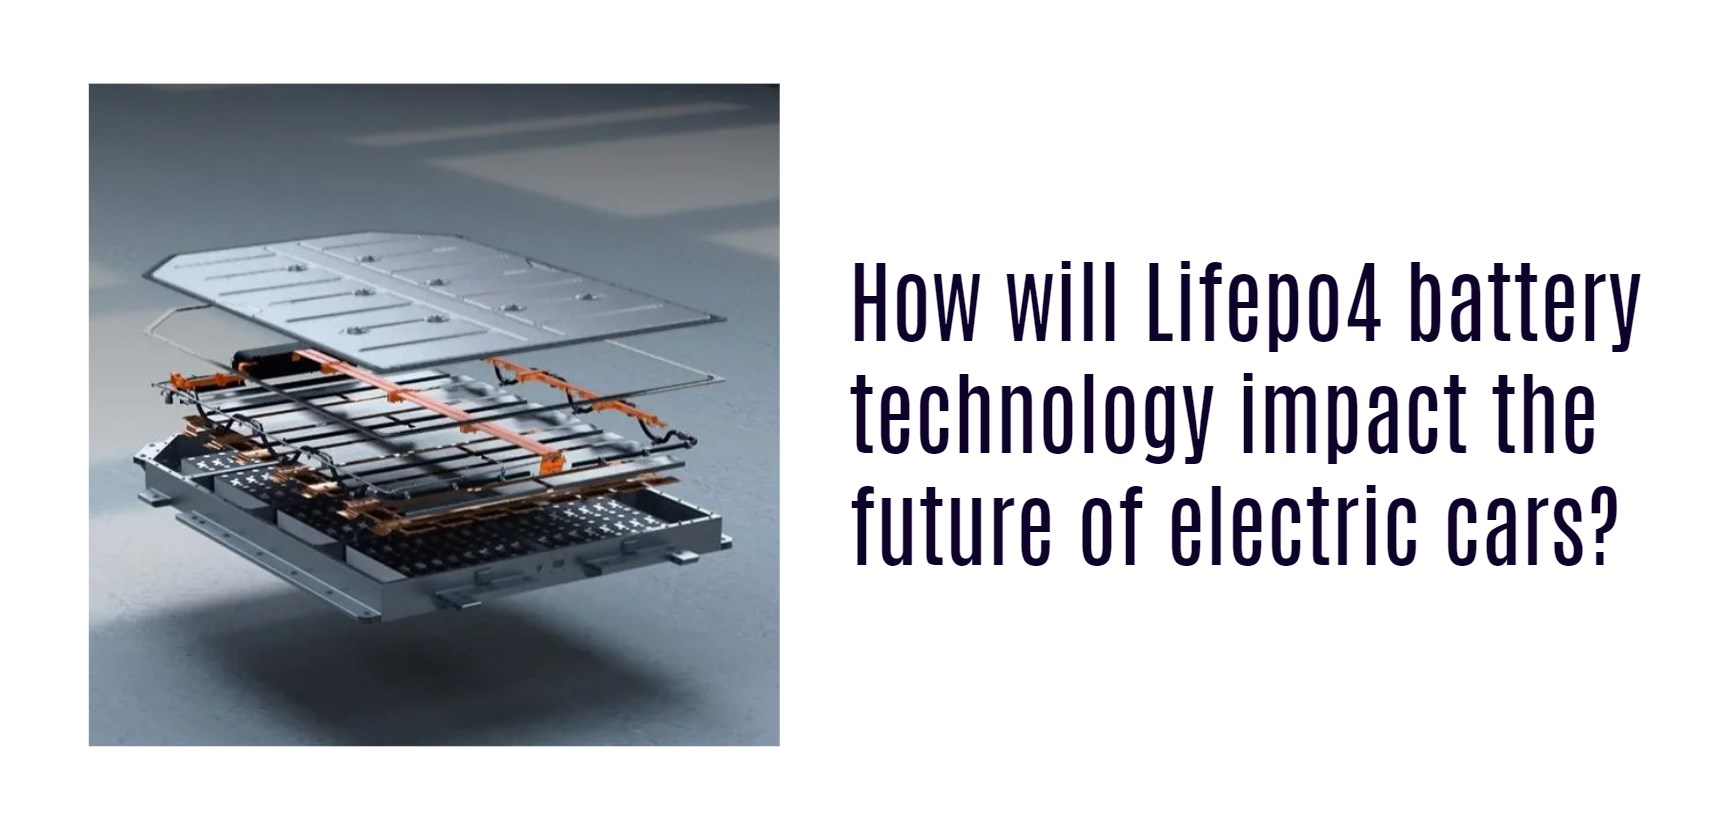 How will Lifepo4 battery technology impact the future of electric cars?